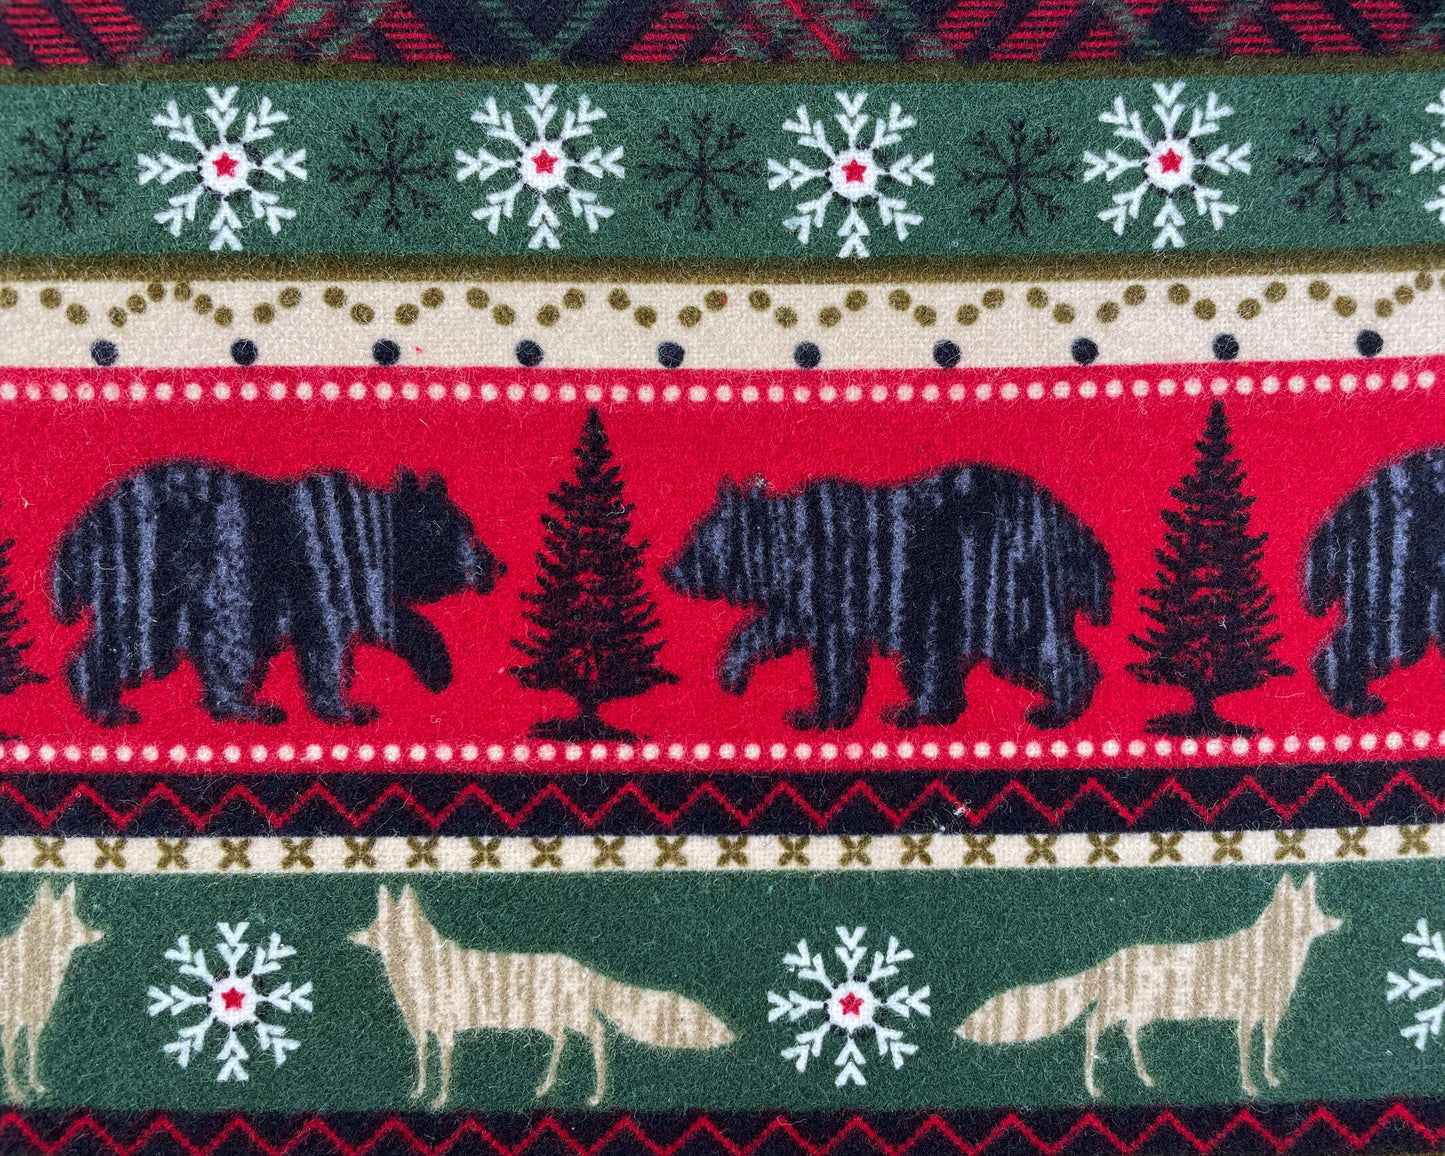 Woodland Animals Striped Super Snuggle Flannel Fabric - 100% Cotton - Winter fabric featuring Bears and Wolves - SHIPS NEXT DAY